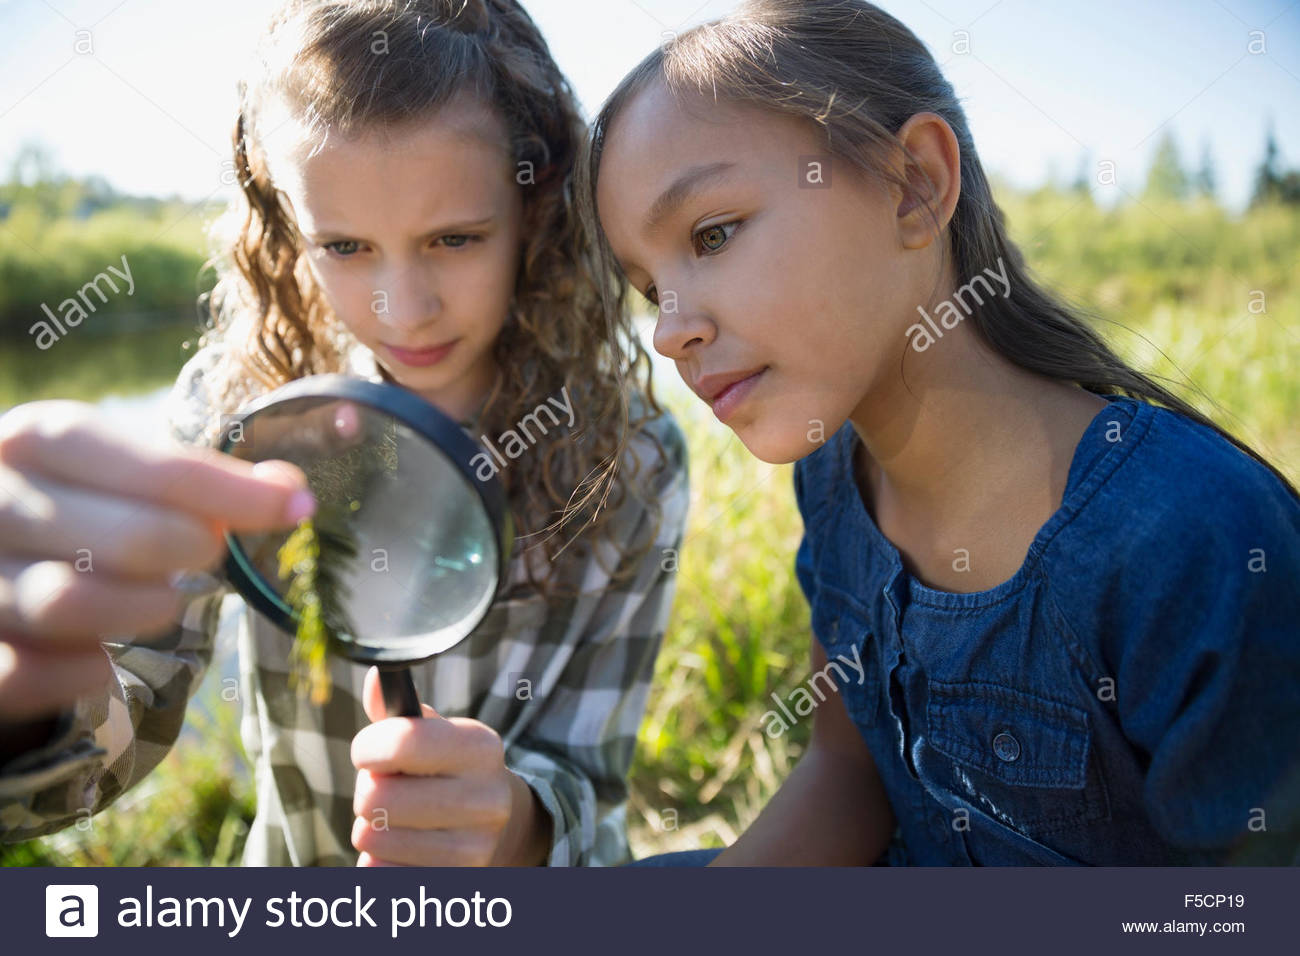 Curious girls examining plant with magnifying glass Stock Photo